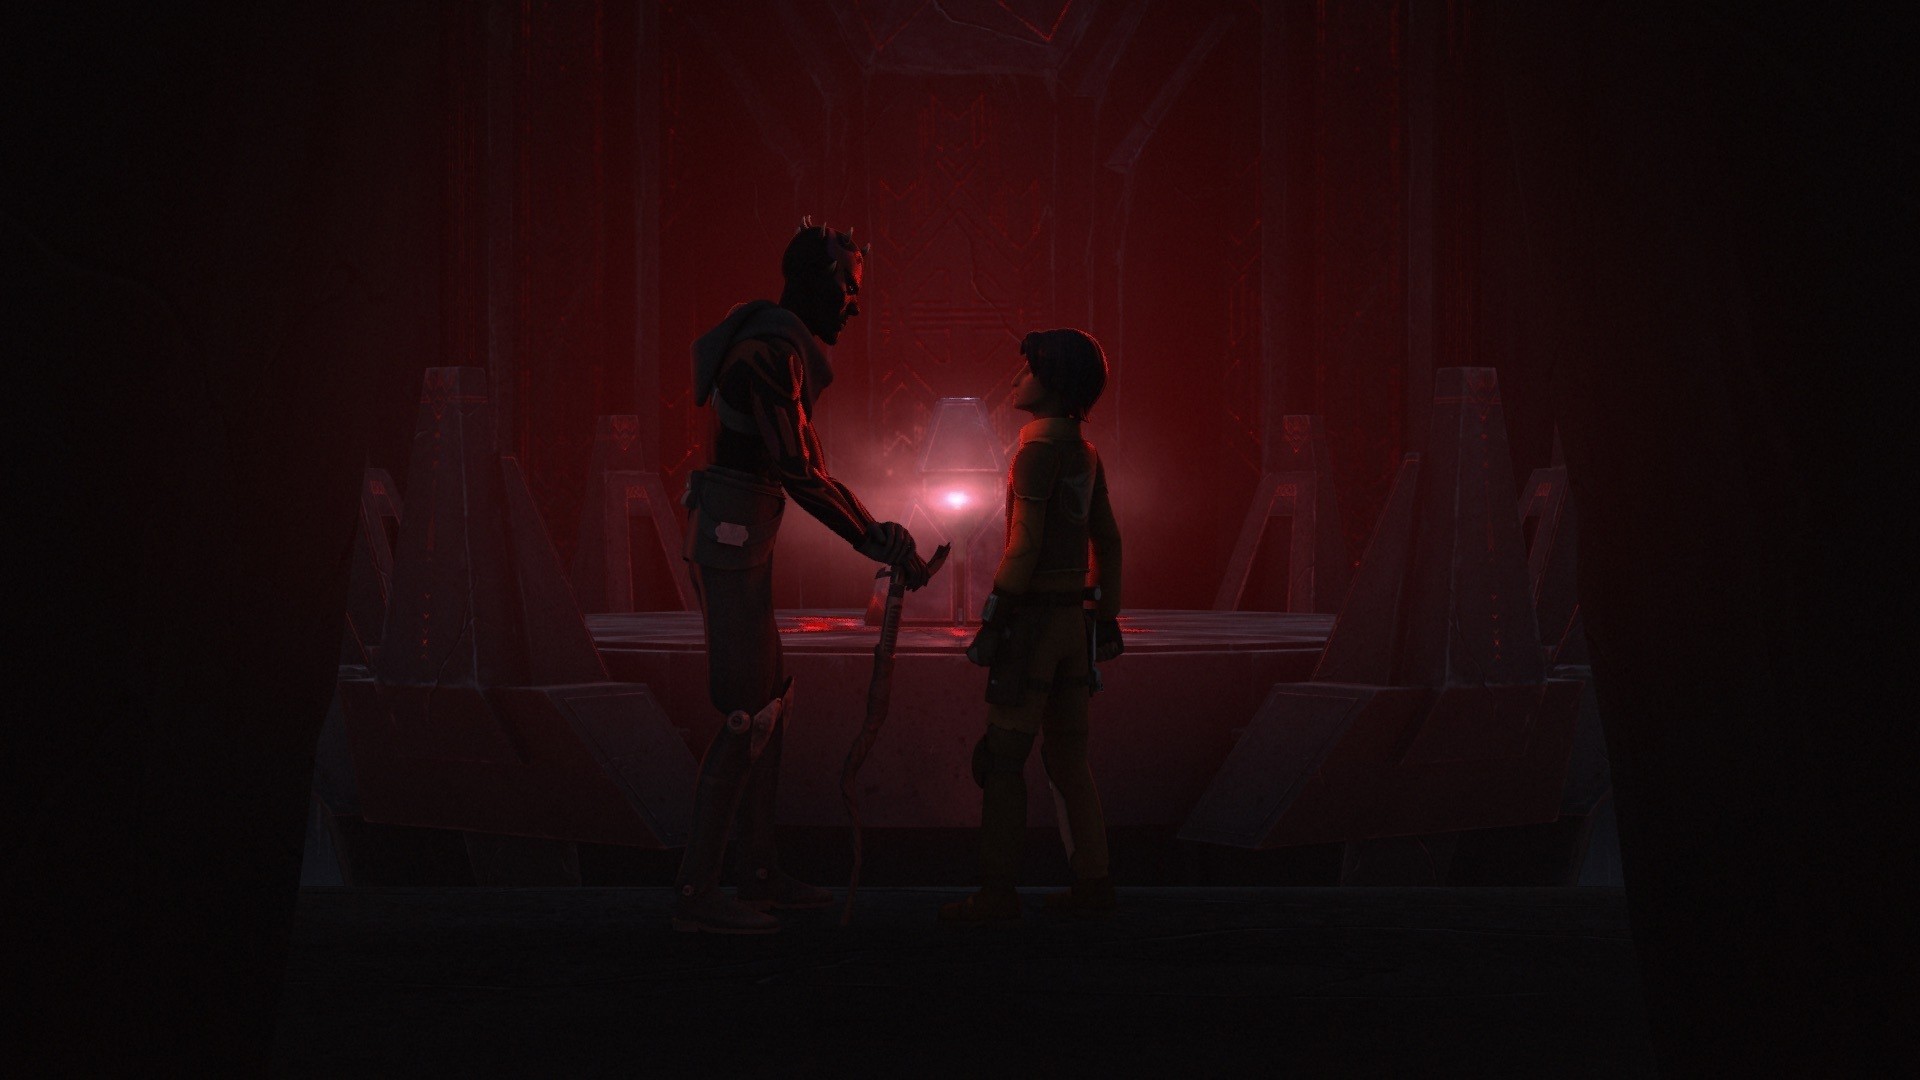 1920x1080 Star Wars Rebels - Maul and Ezra in front of the Sith holocron